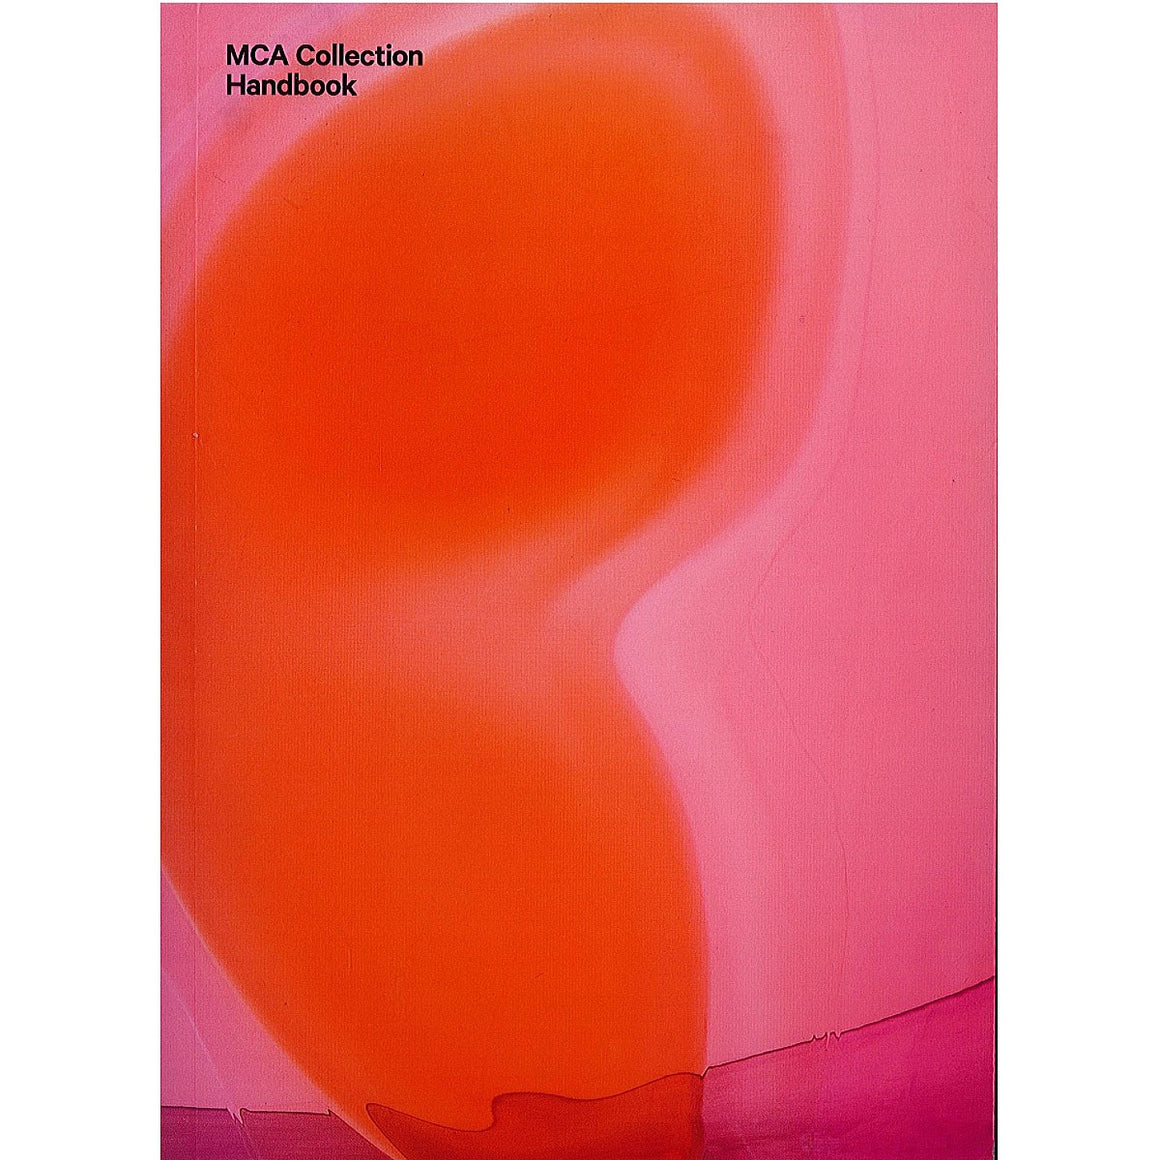 The cover of the MCA Collection Handbook Feautring artwork by Dale Frank. The artwork is made of varnish and lighter fluid on plexiglass and and features rich orange and pink tones.